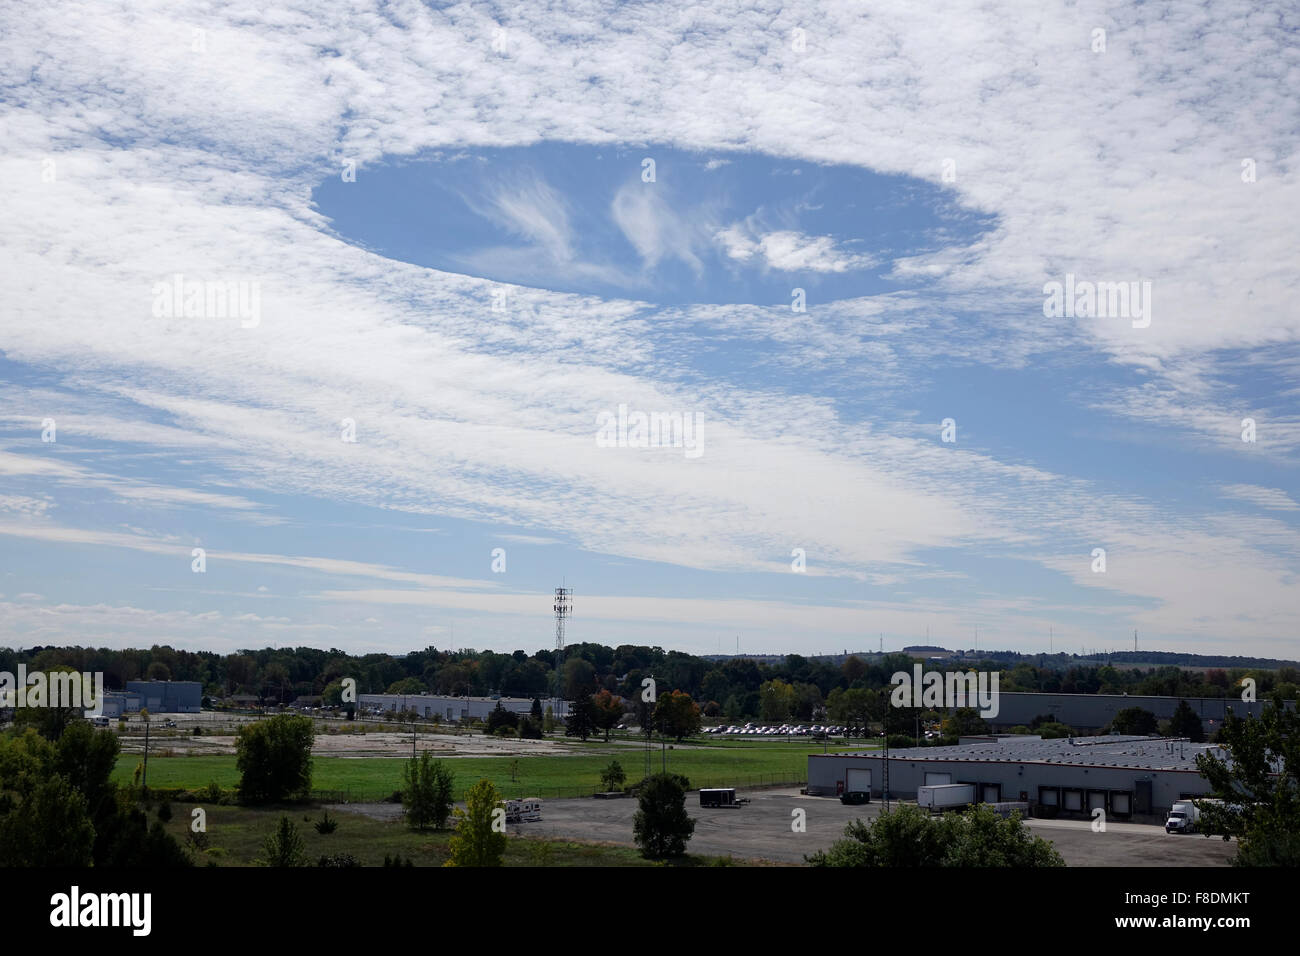 A Circular Fallstreak Cloud Formation Over Woodstock Ontario Canada On October 1st 2015 Sky Punch, Punch Hole Clouds, Sky, Weather Stock Photo